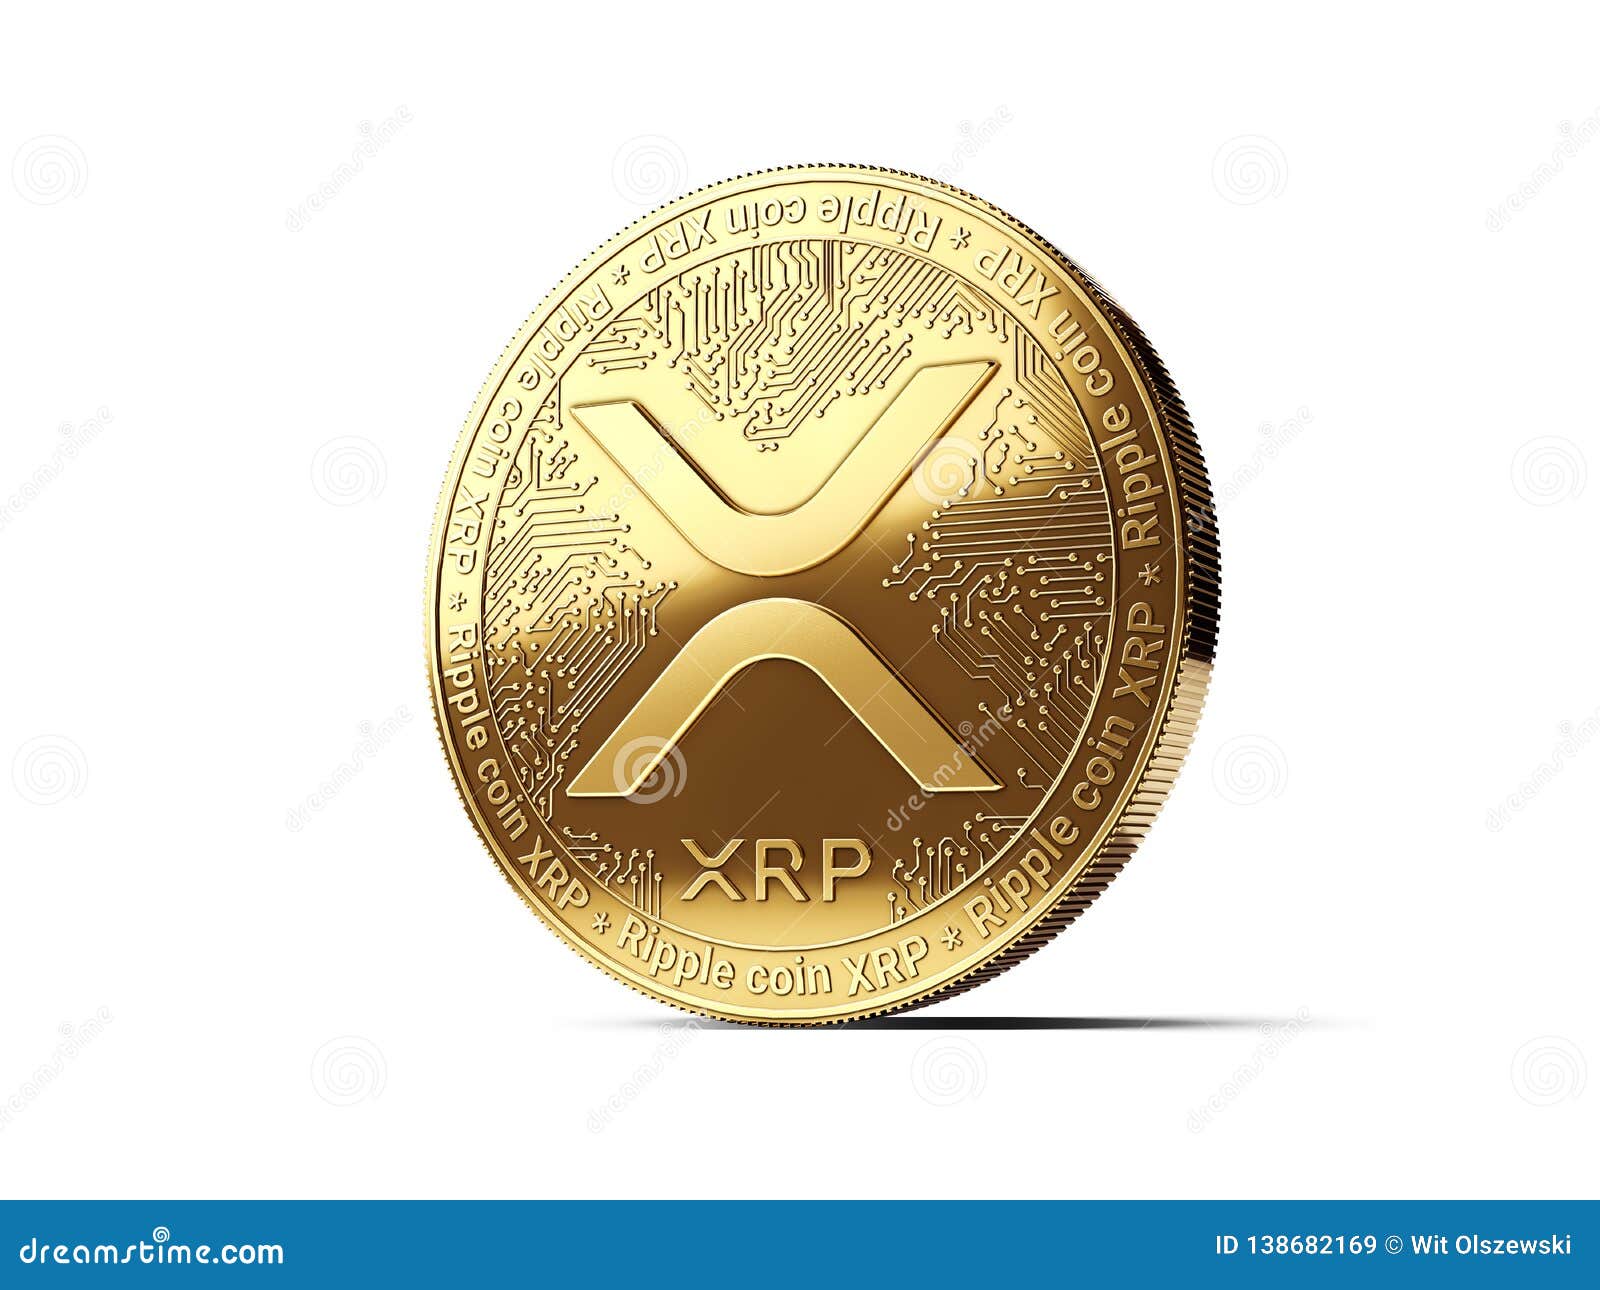 xrp free coin)